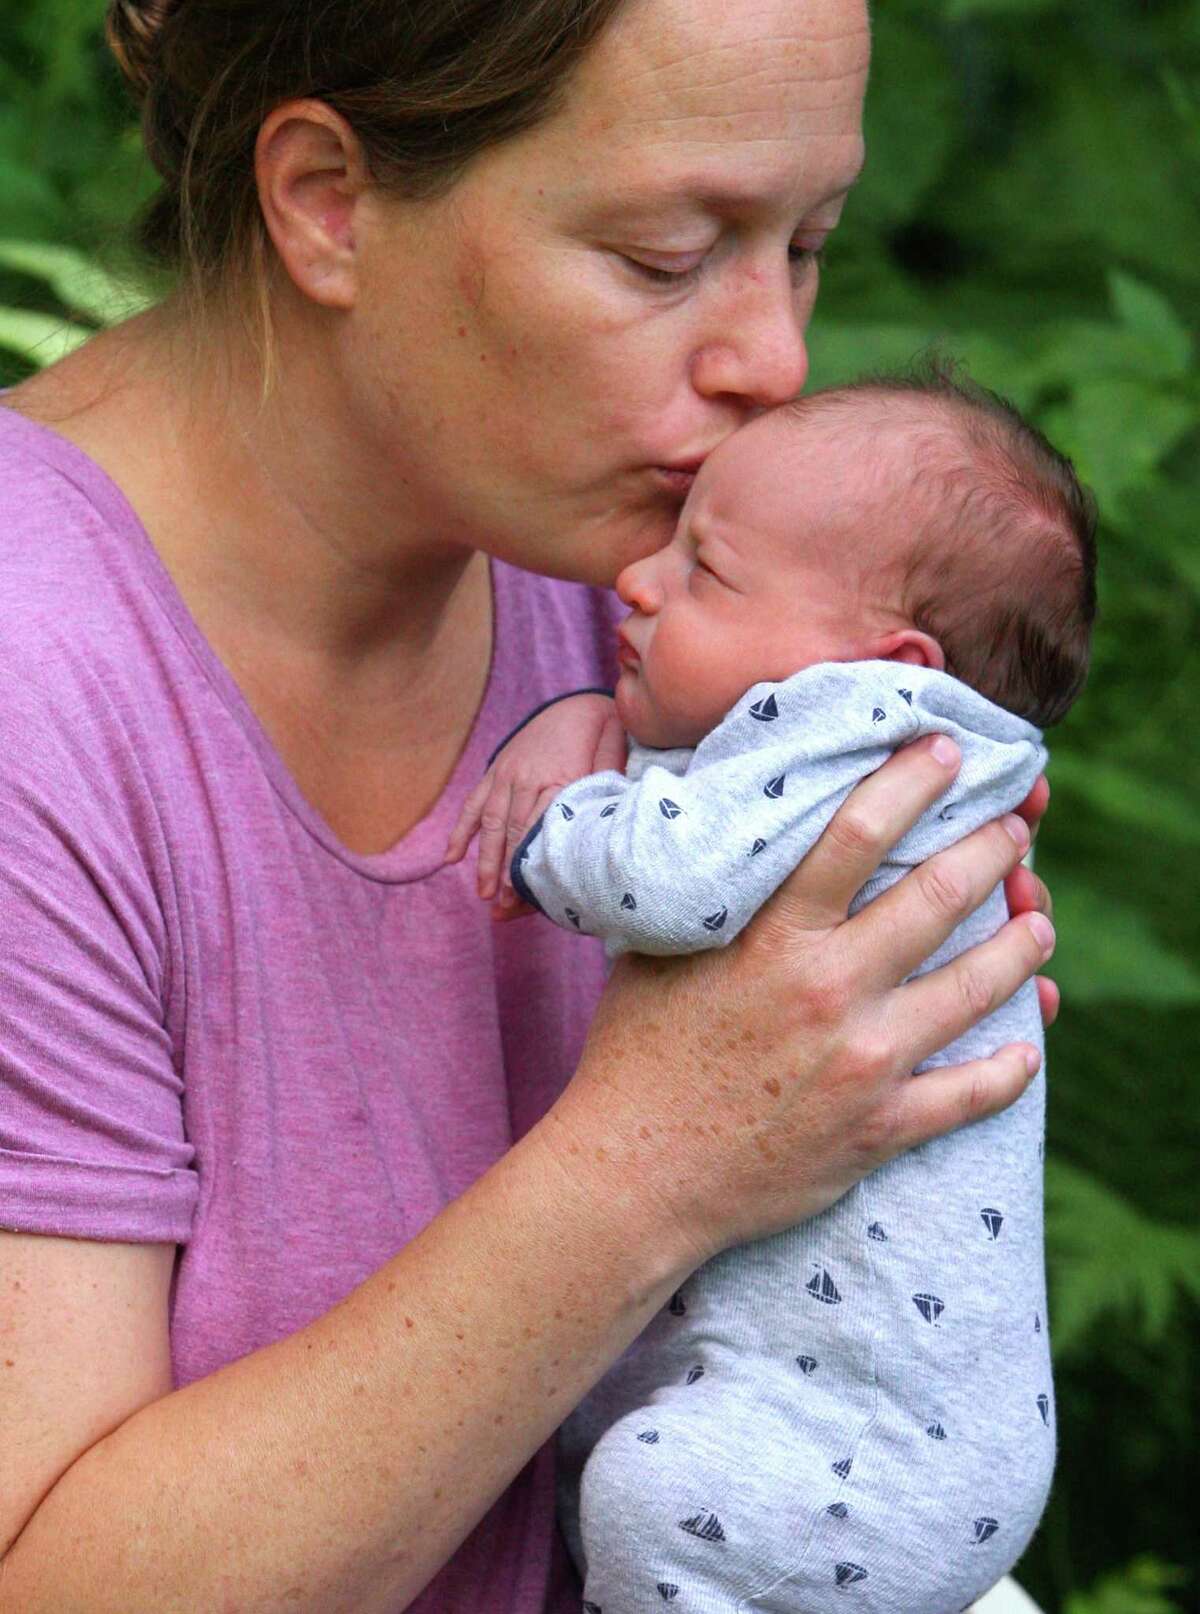 Jenn Zazula kisses her one-week-old son Luke at her home in Greenwich, Conn., on Saturday July 31, 2021. Even before COVID-19 hit, quality day care centers were in high demand. Now, with parents returning to work, it has been difficult for many to find childcare openings in the area.